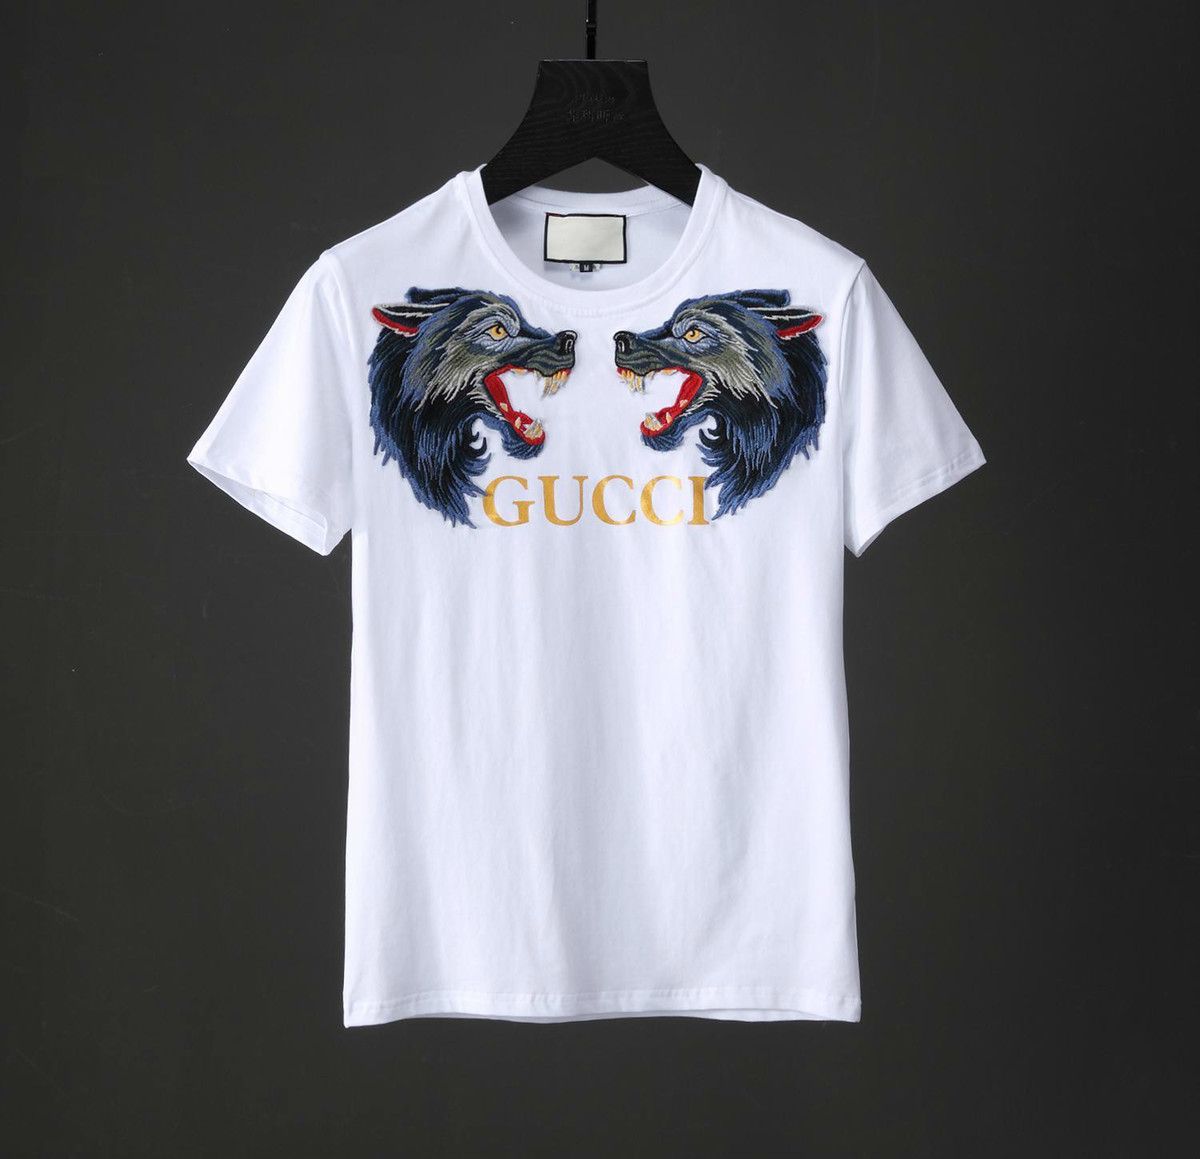 Design Youth Shirts Agbu Hye Geen - swag t shirt v1 trasparent with outlines new roblox